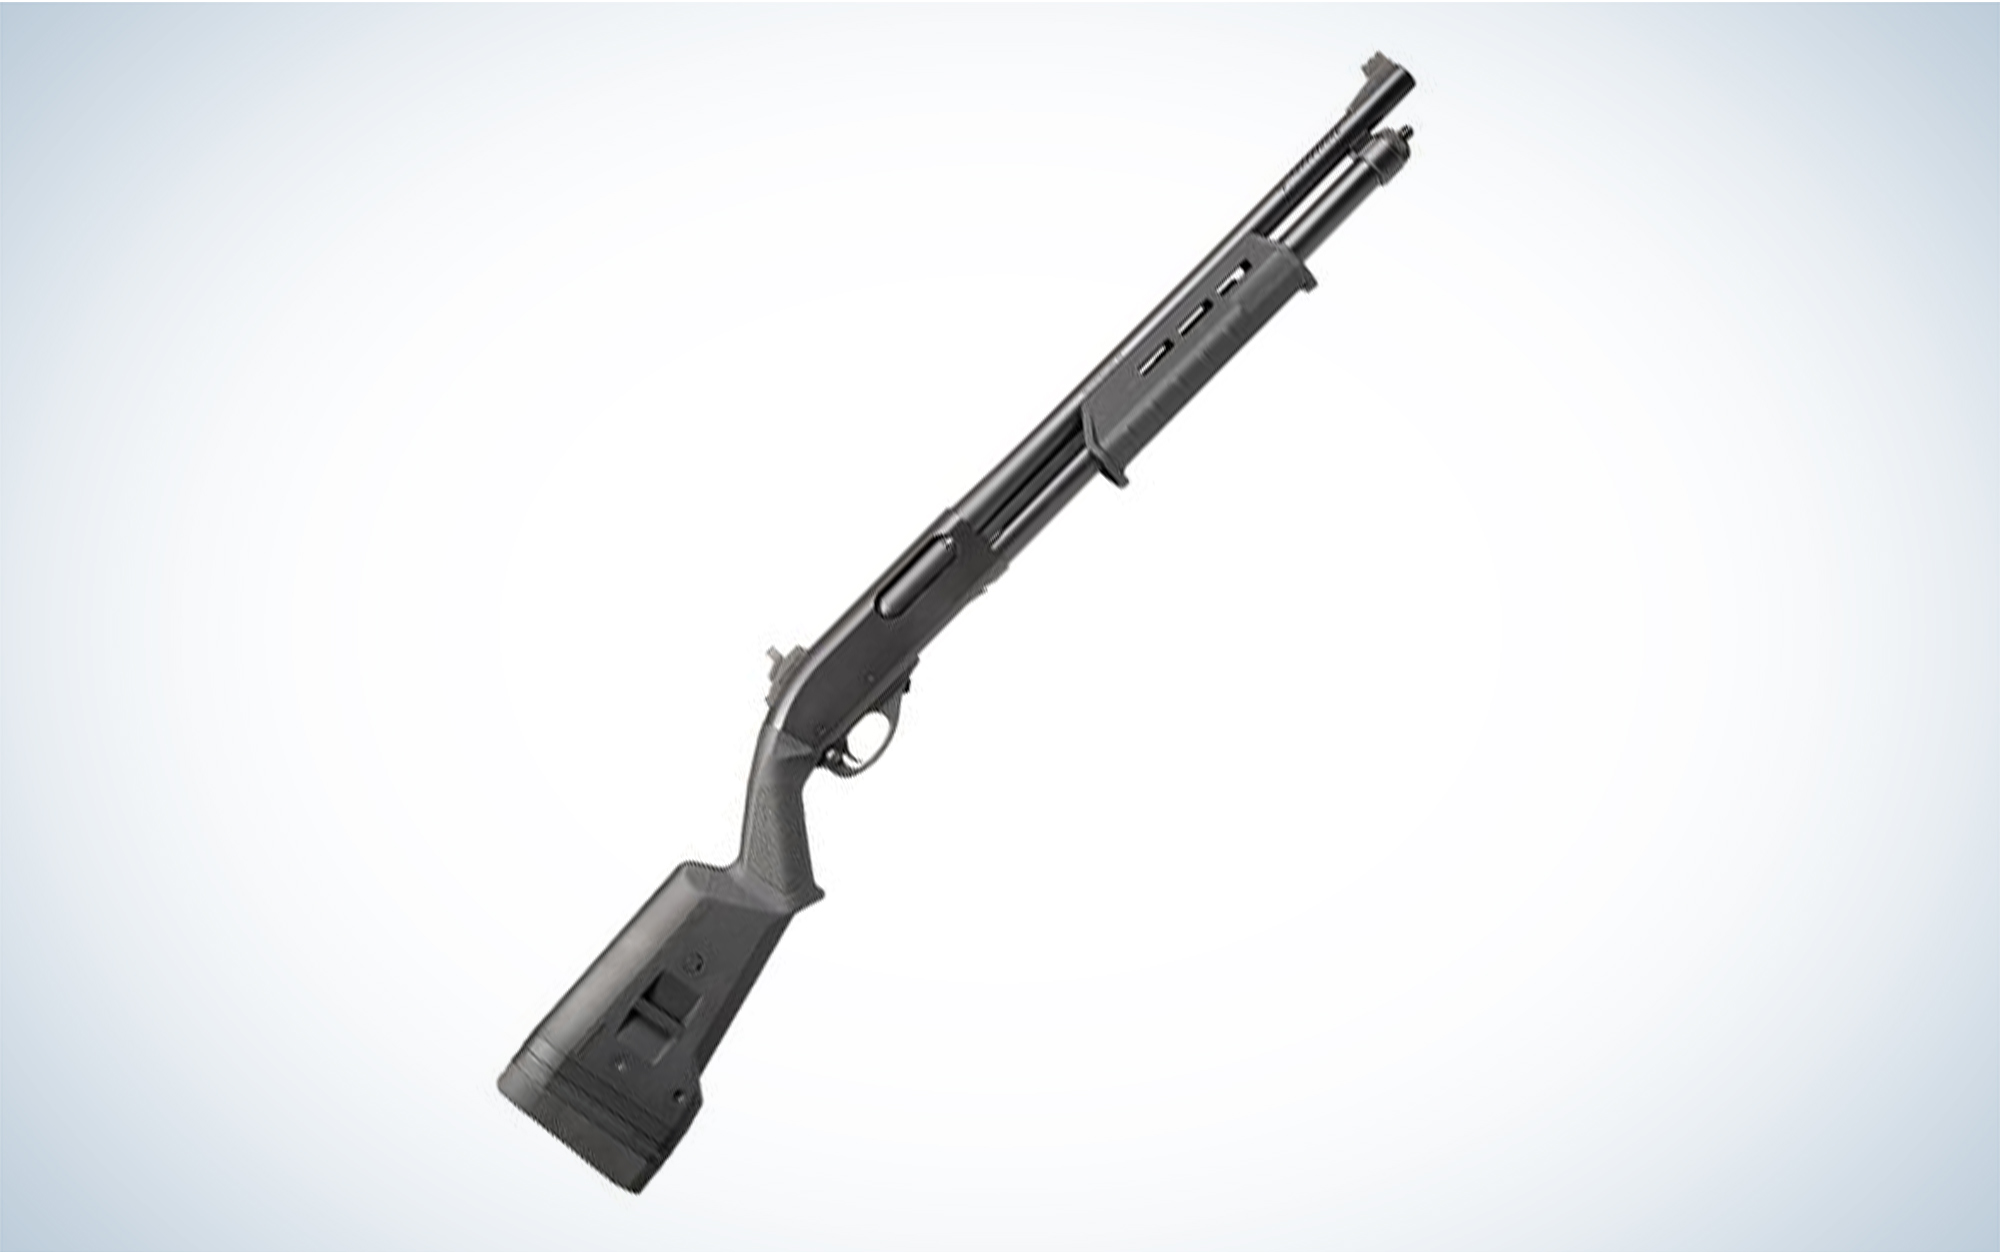 We tested the Vang Comp Systems Model 077 Remington 870 Tactical.